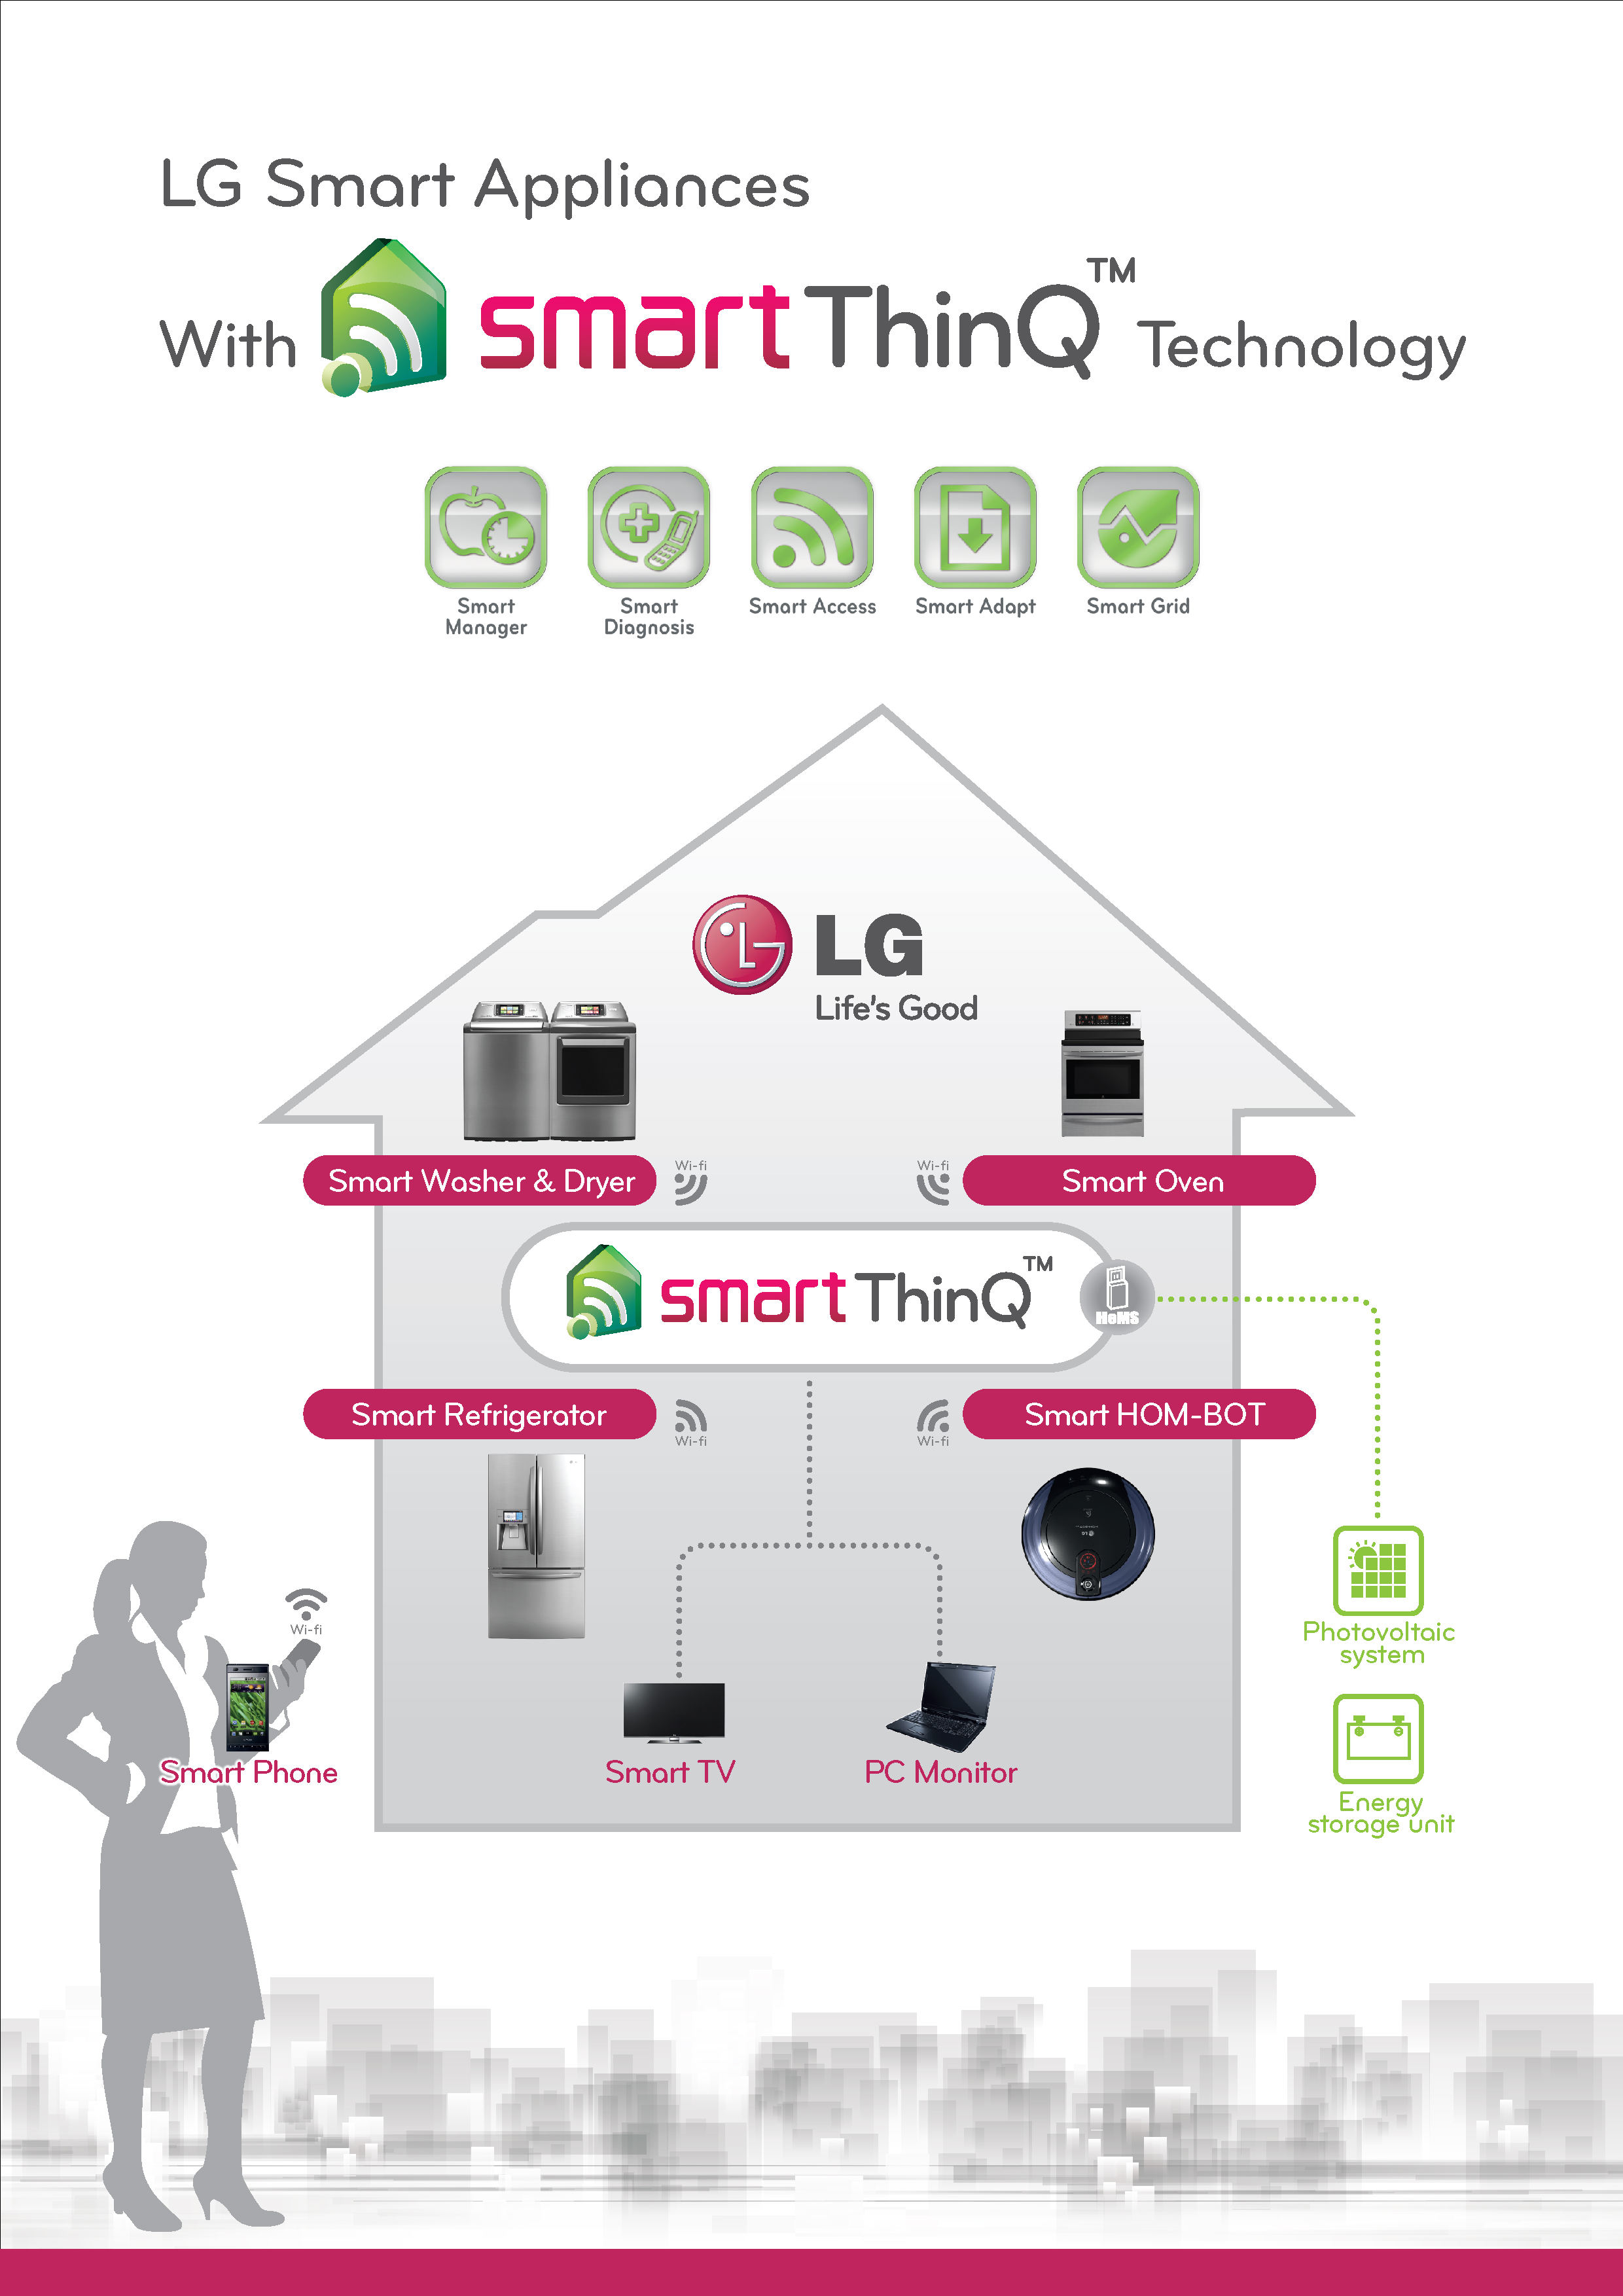 An infographic showing how SmartThinQ™ technology works, connecting the LG washer & dryer, oven, refrigerator and vacuum cleaner with a smart TV or PC